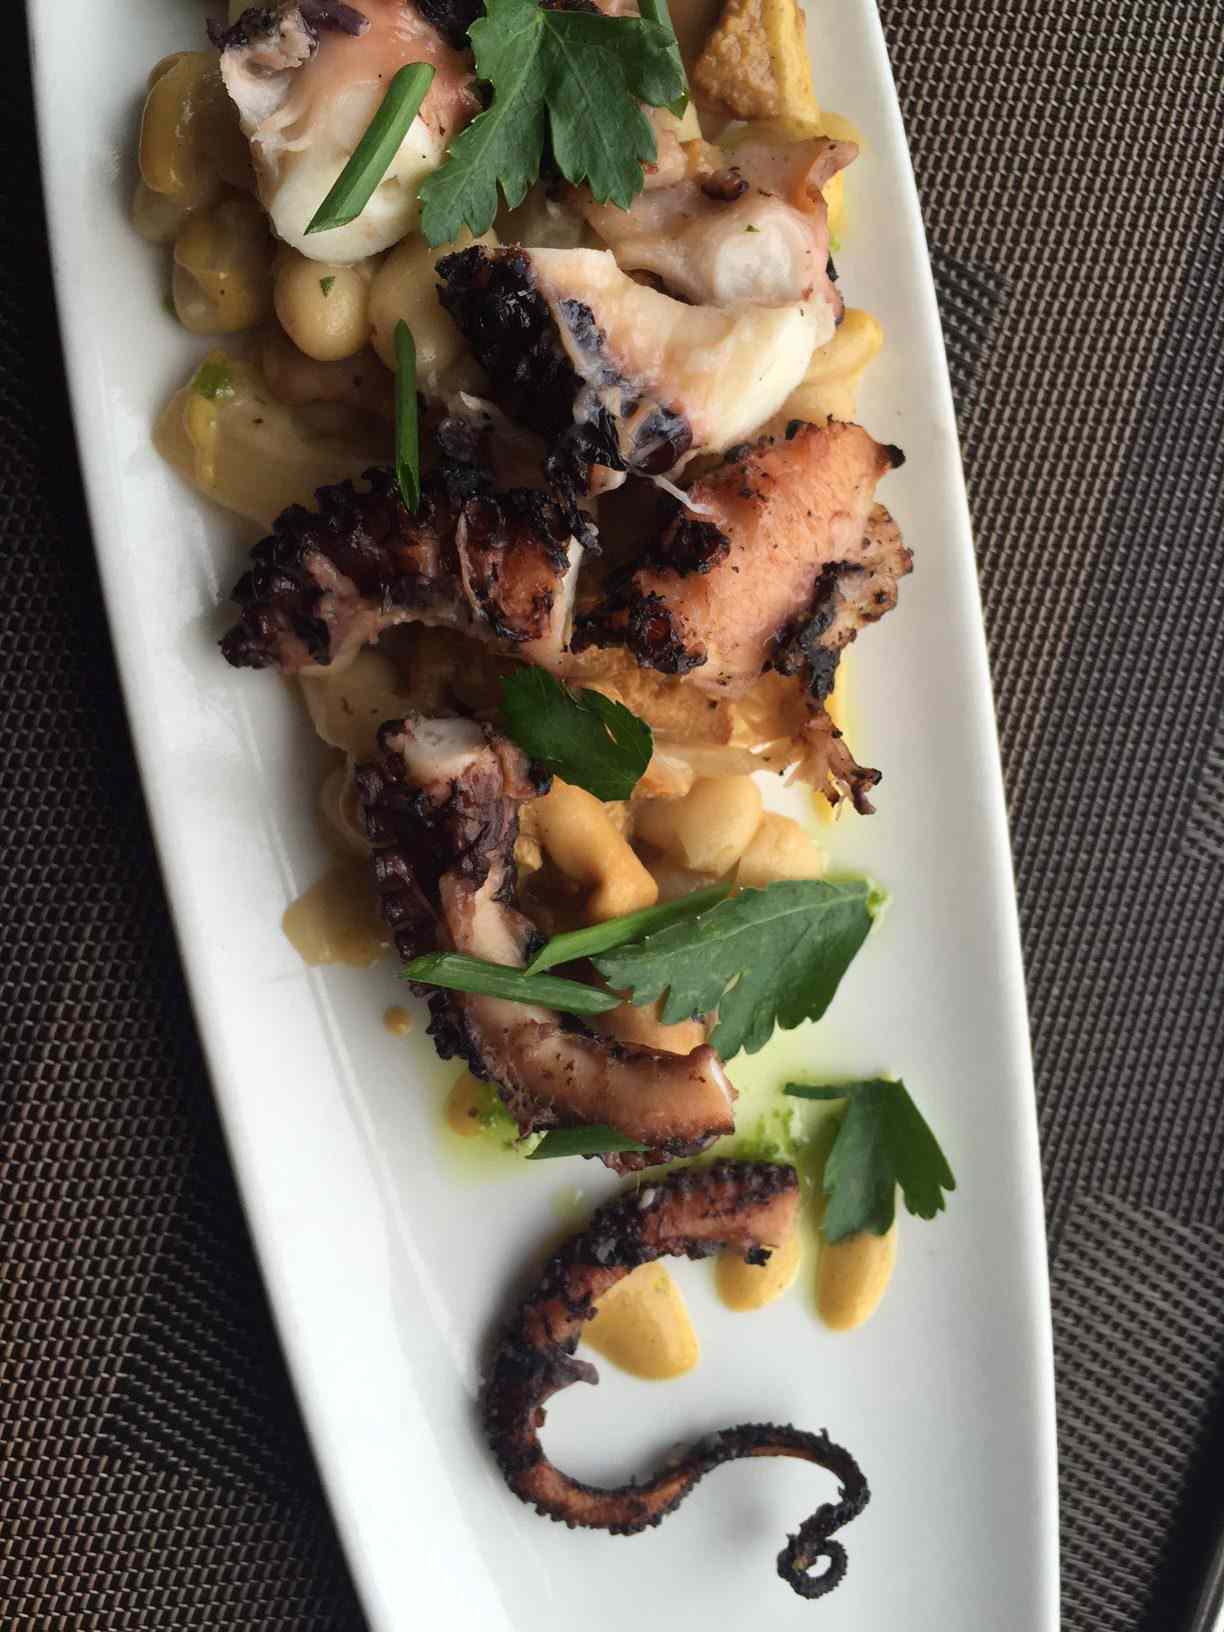 Octopus appetizer by chef Alvin B